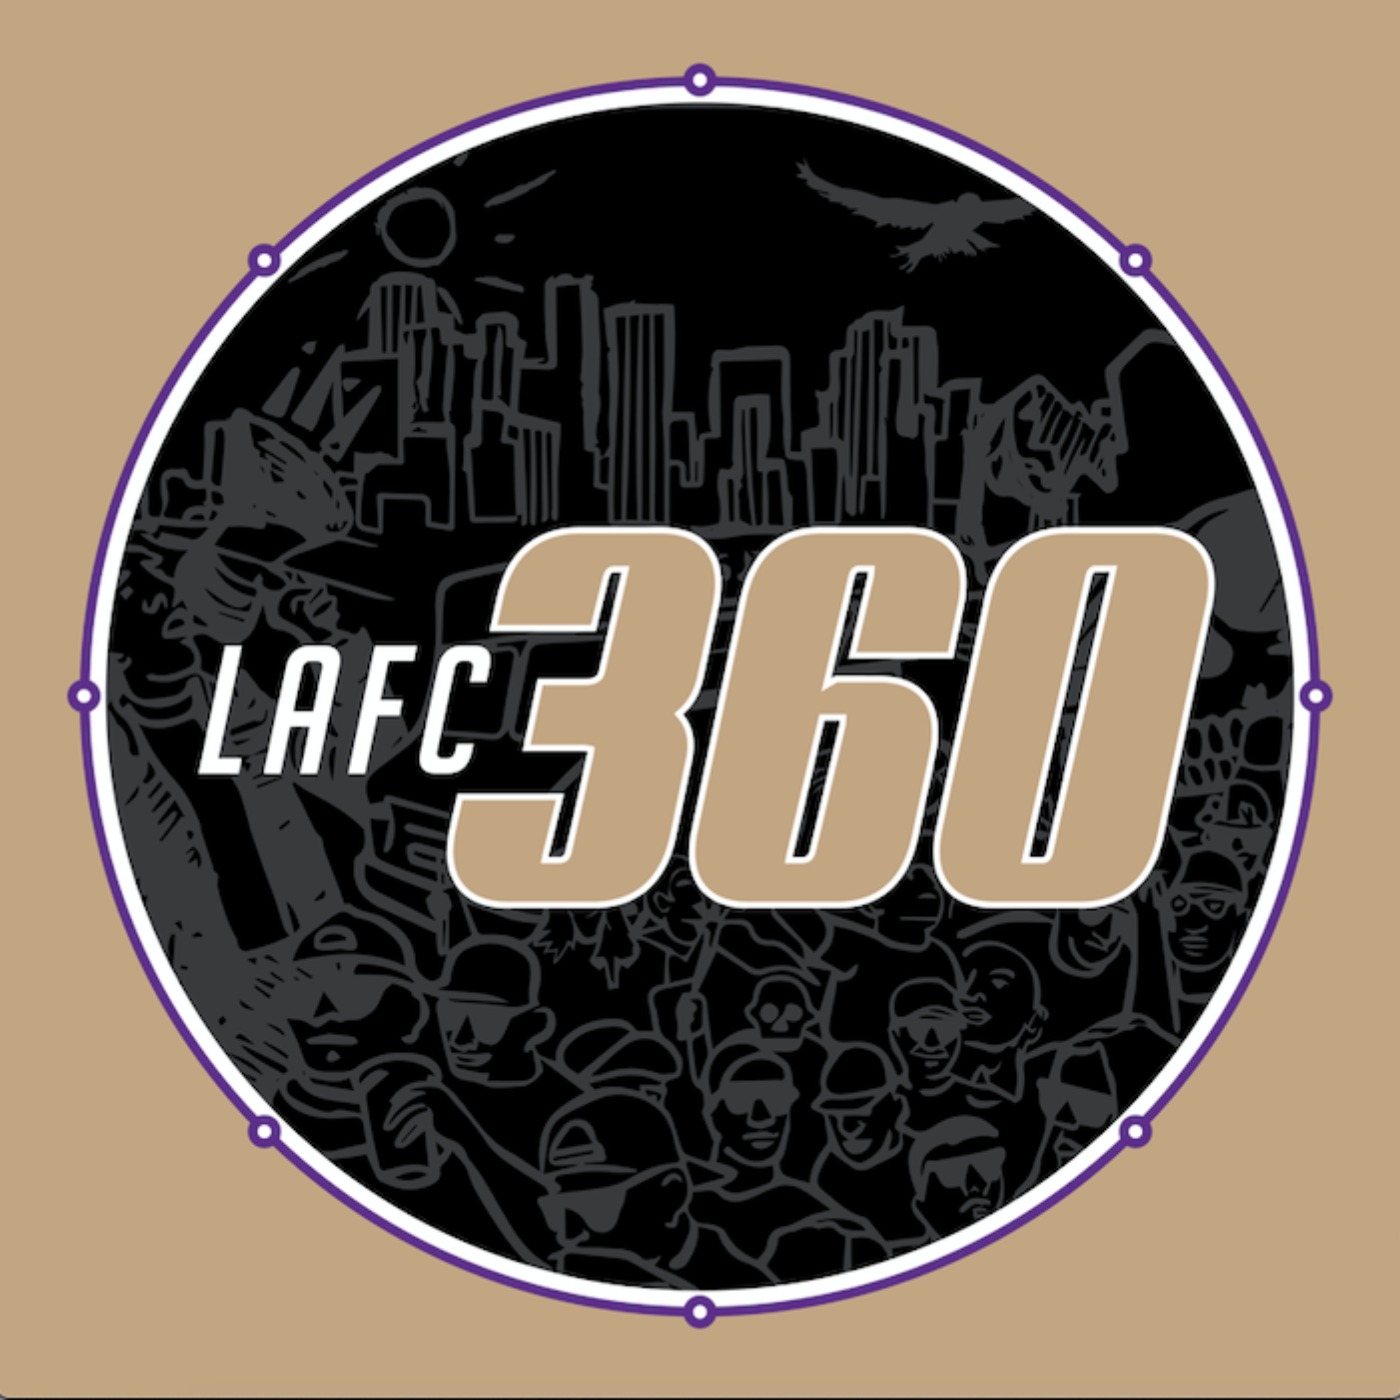 LAFC wins the 2022 MLS Supporters' Shield